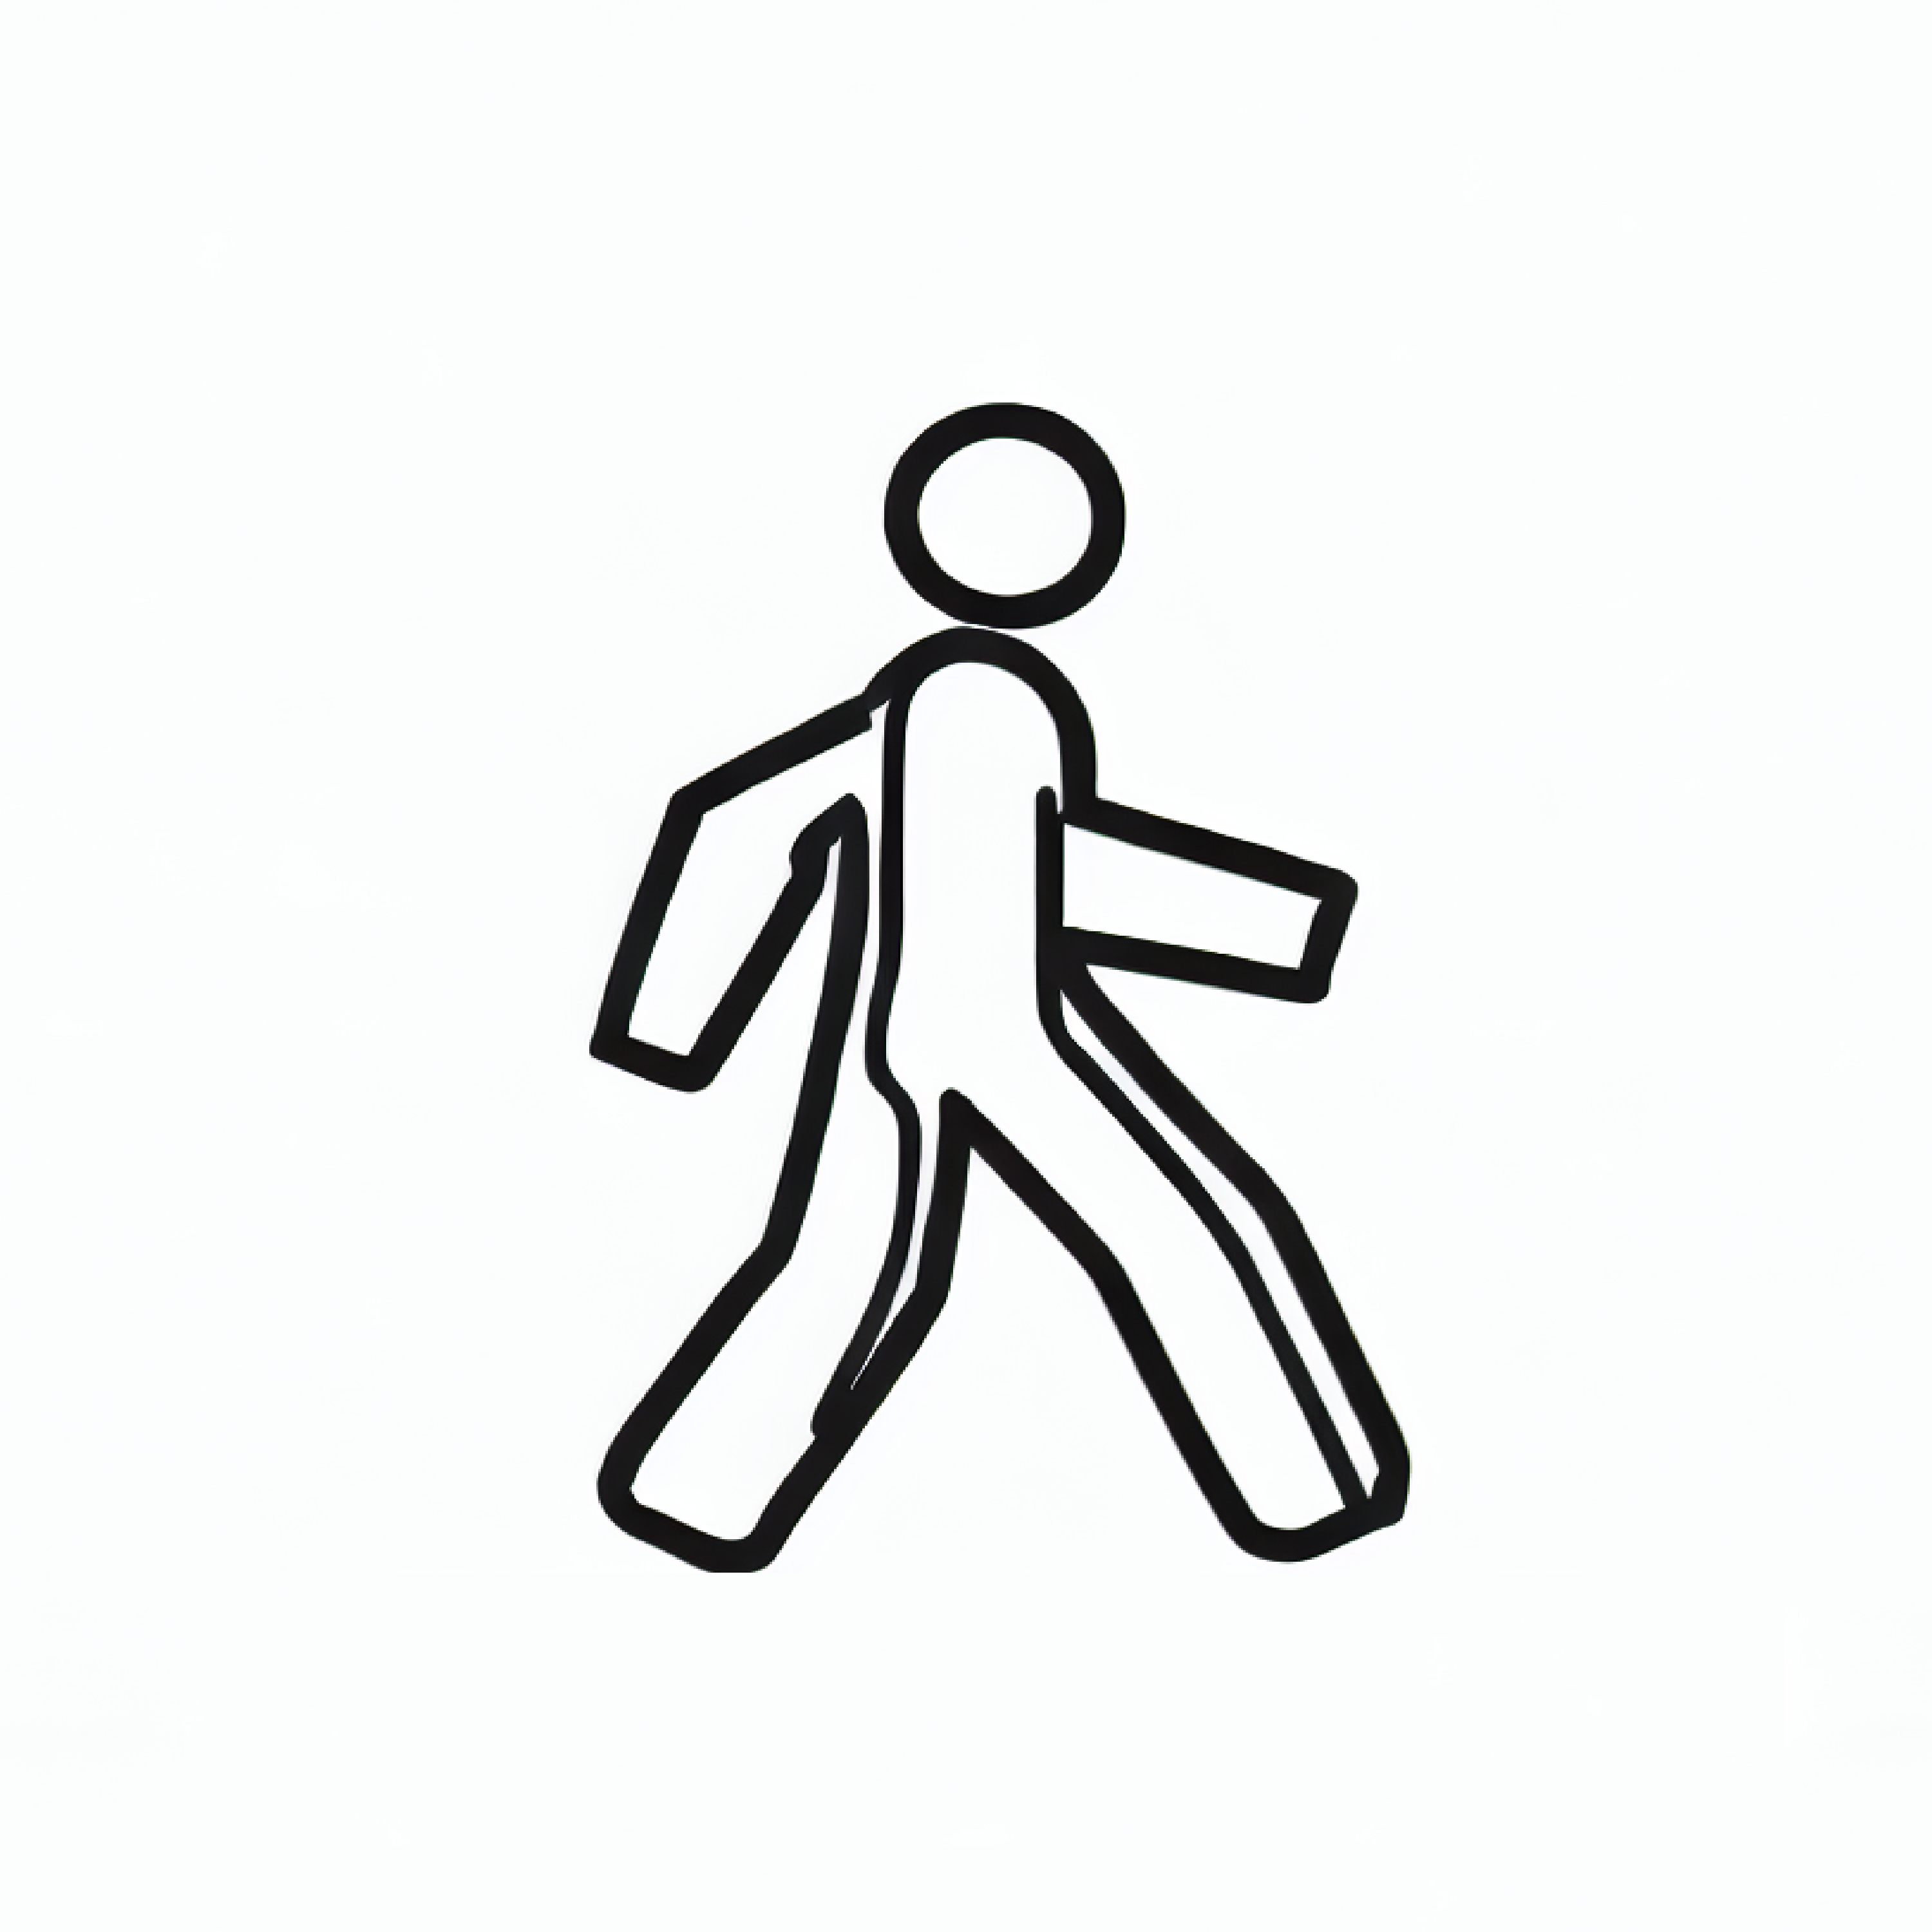 Line drawing of a pedestrian signal